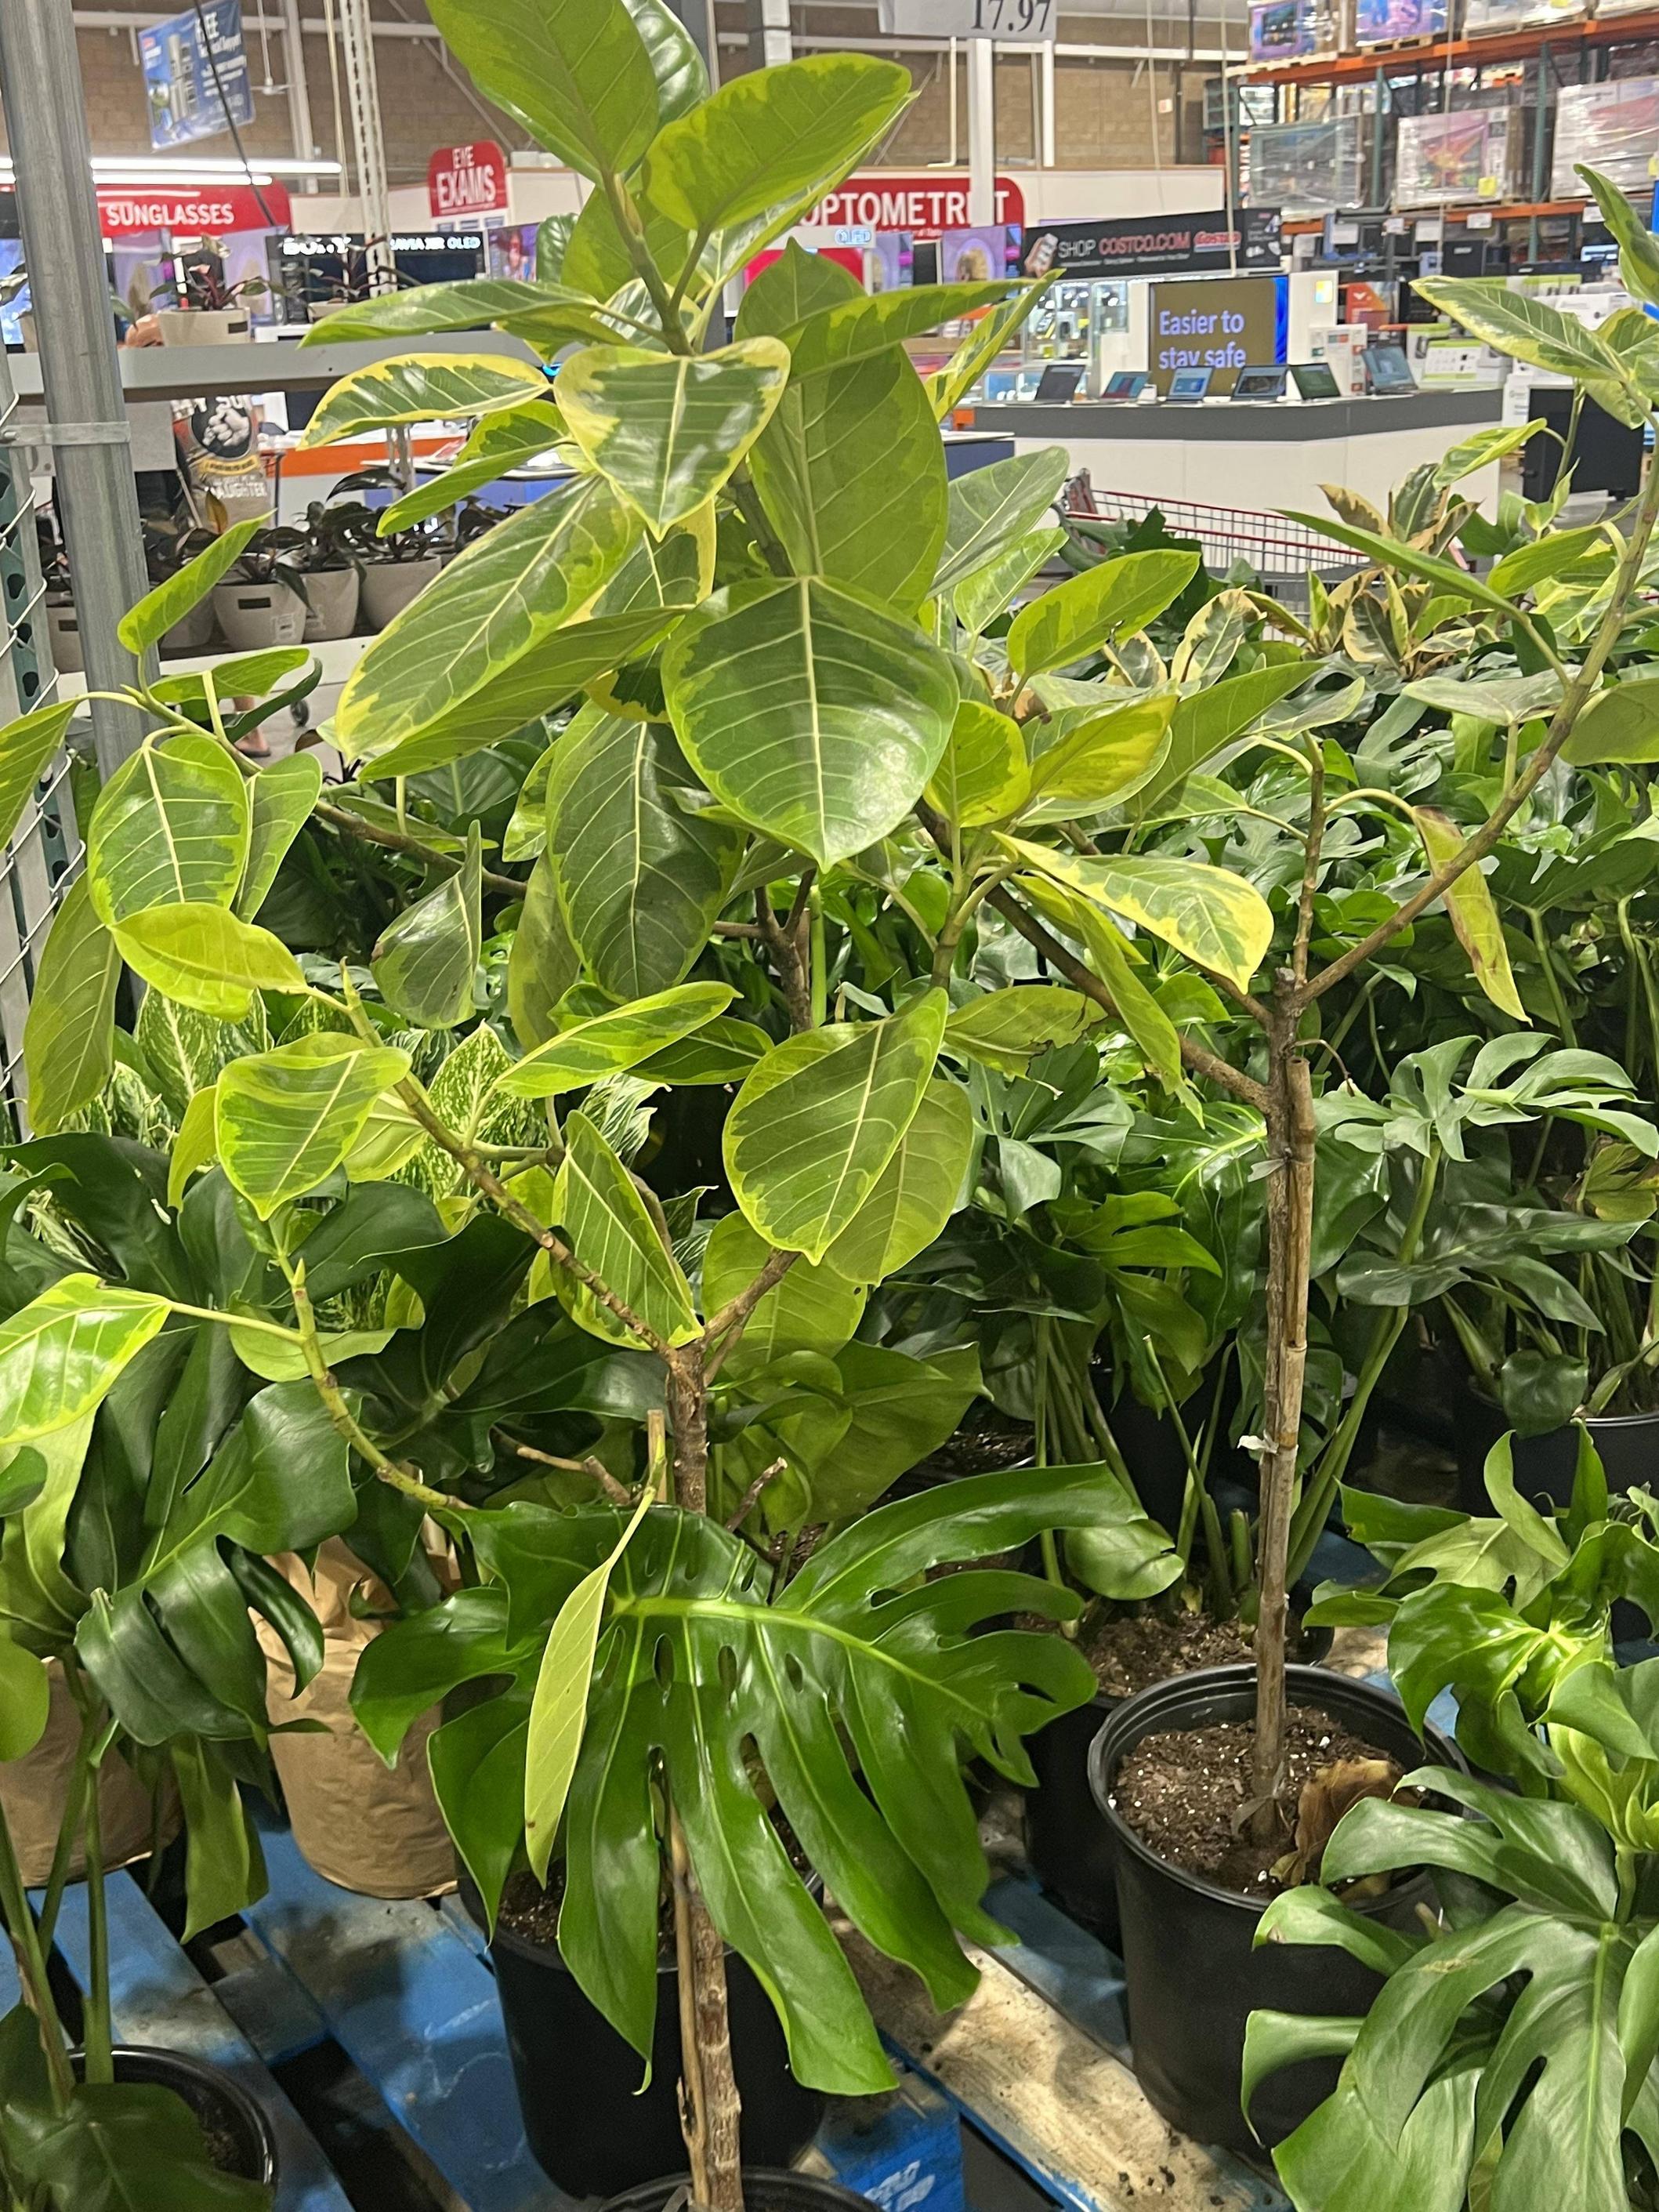 select Costco stores only: Tropical plants on sale  - $17.97 (Usually 35$) YMMV